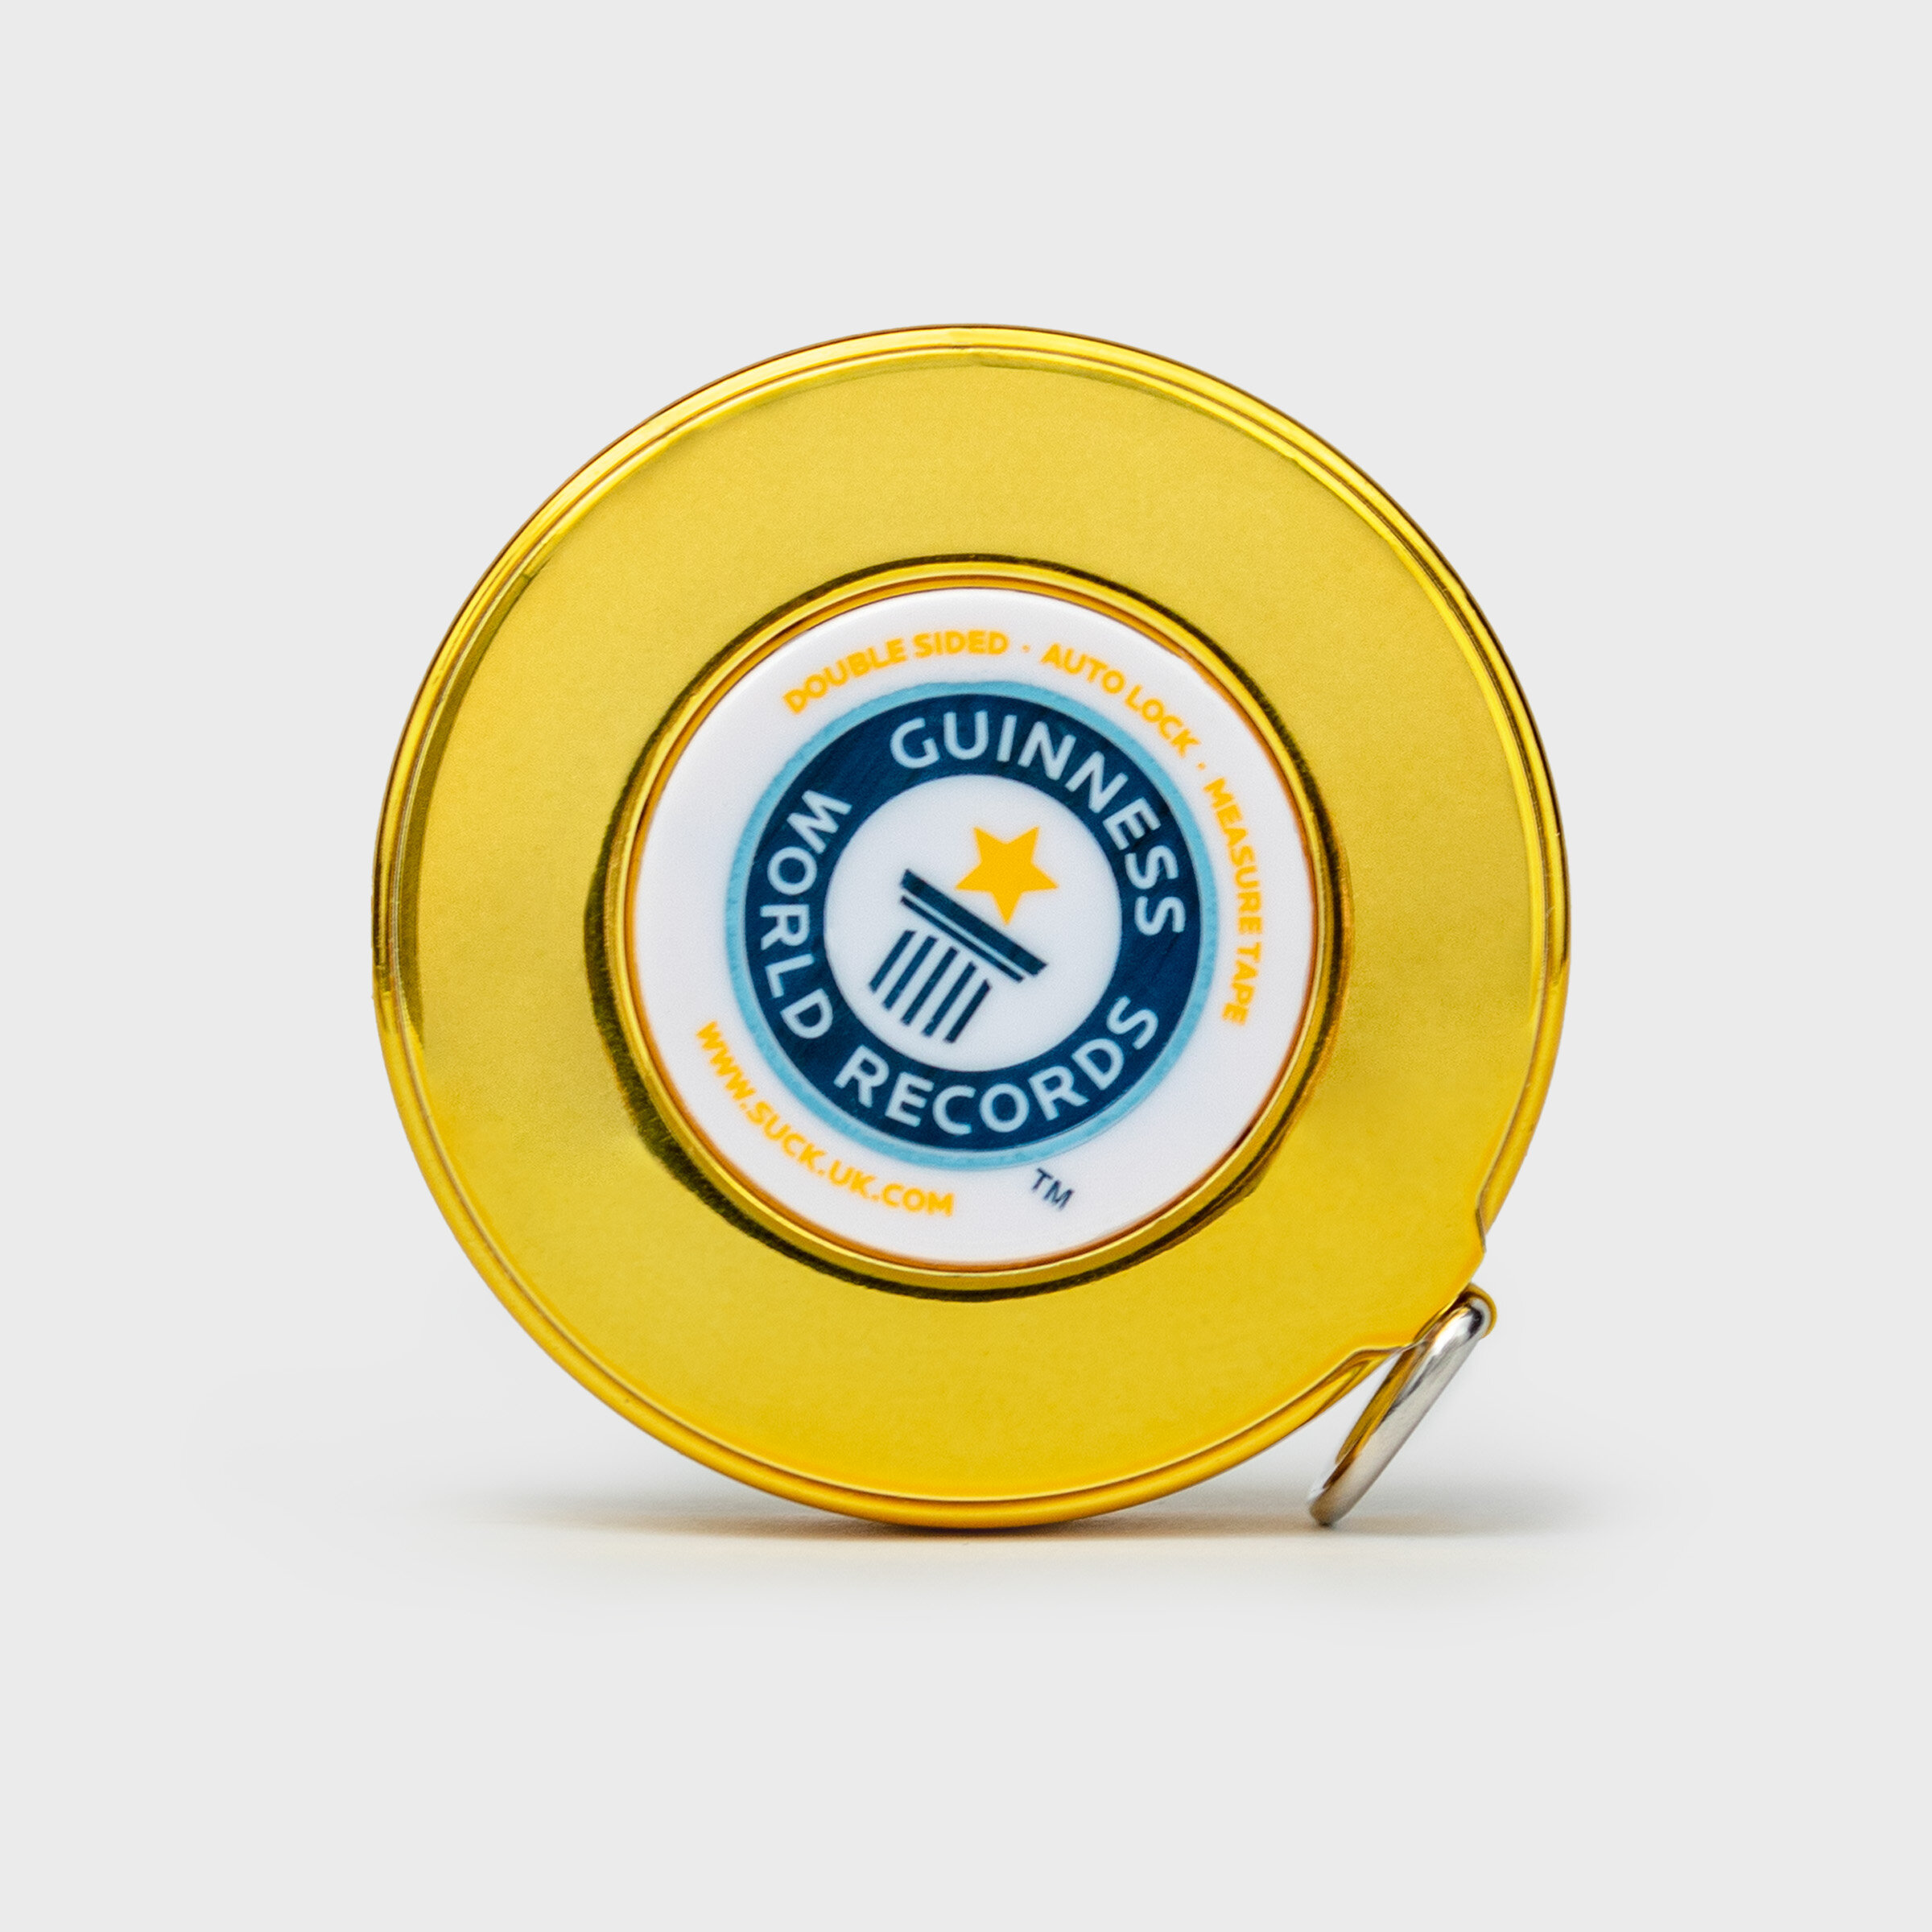 Guiness World Records Tape Measure